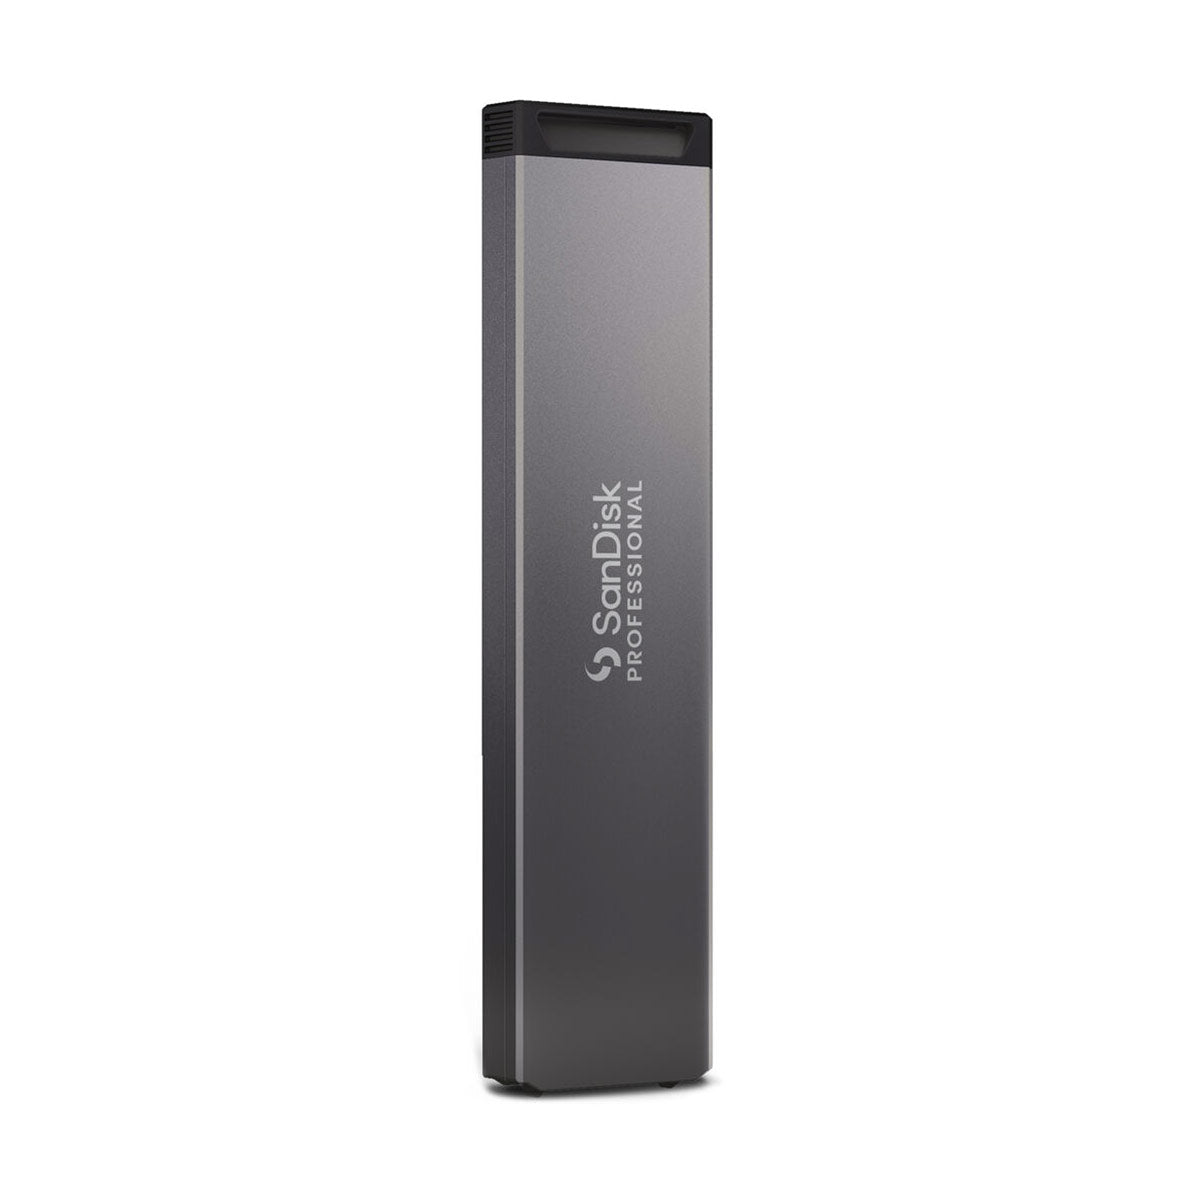 SanDisk Professional 4TB PRO-BLADE SSD and TRANSPORT